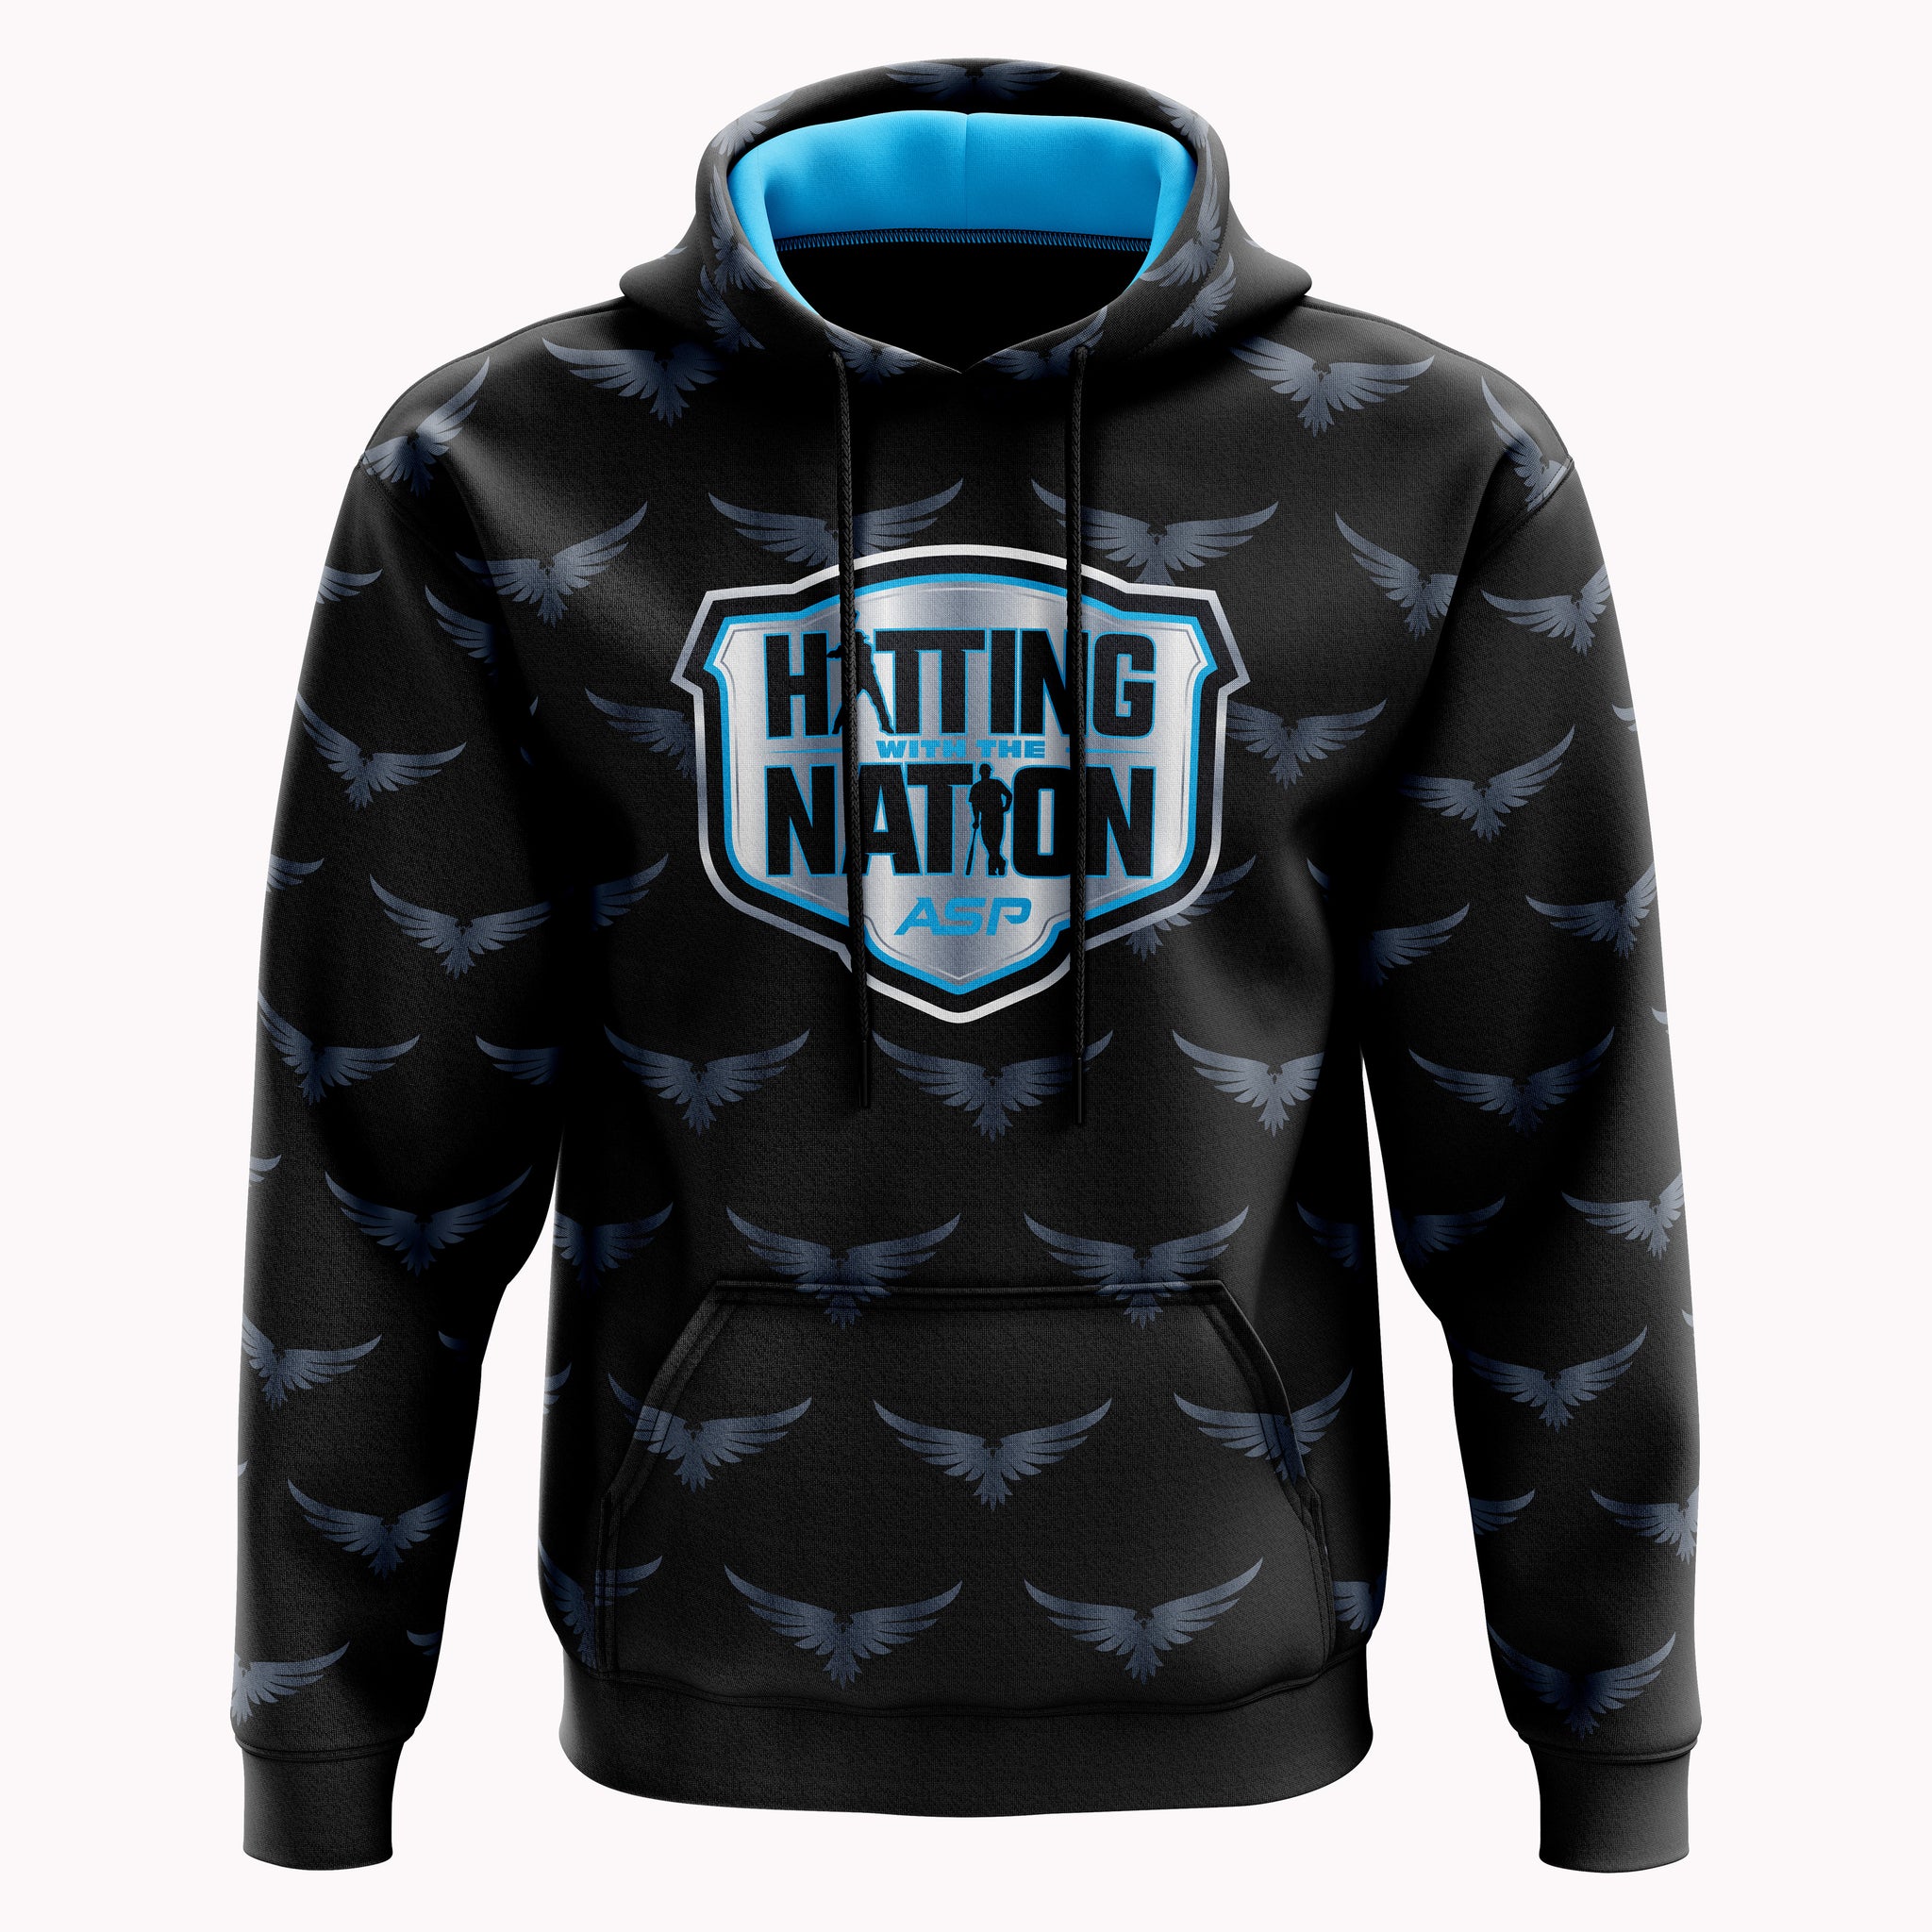 ASP Hitting with the Nation Hoodie